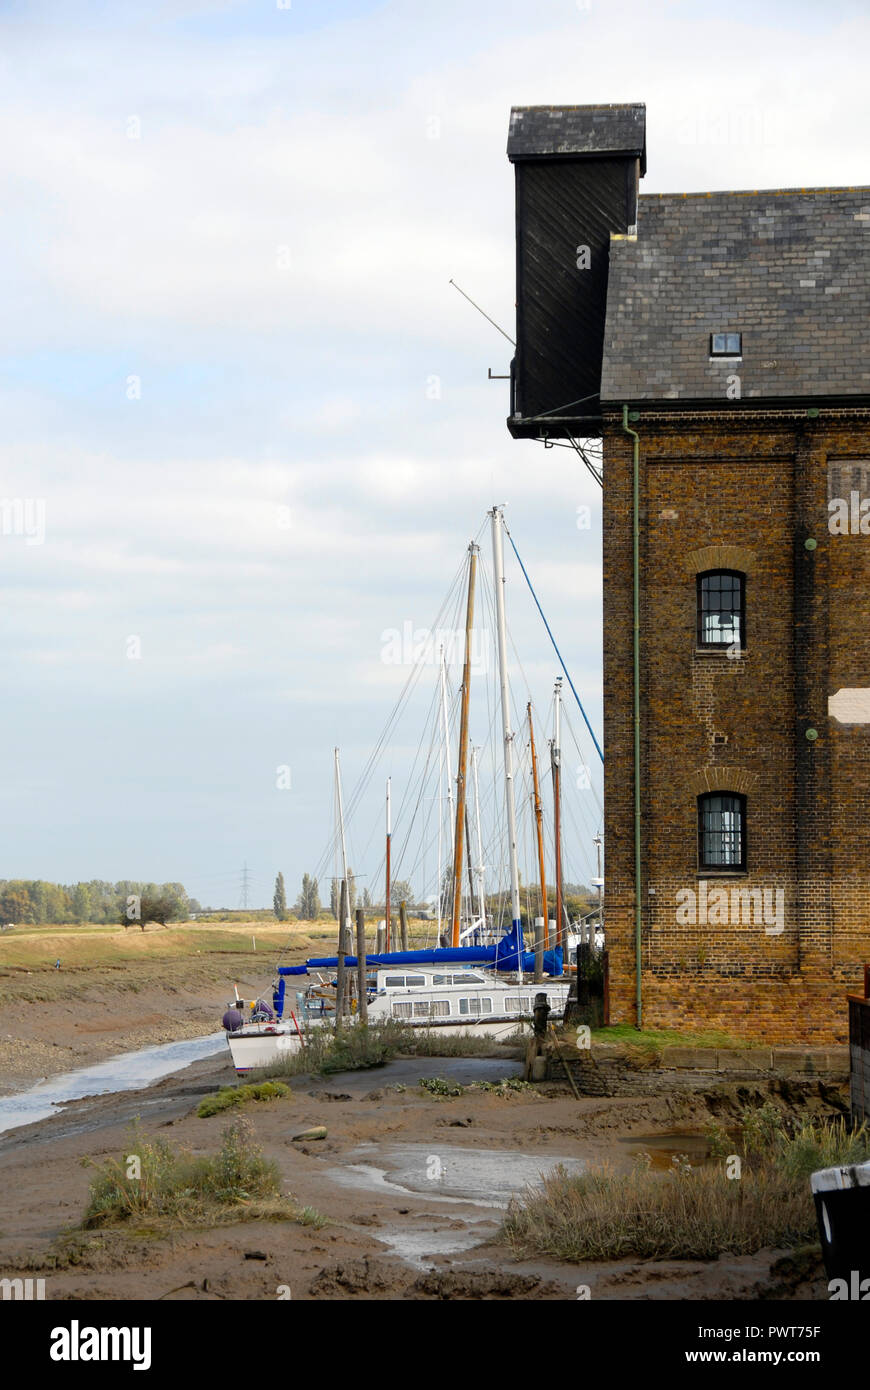 Boats aground at low tide beside former warehouse, Faversham, Kent, England Stock Photo